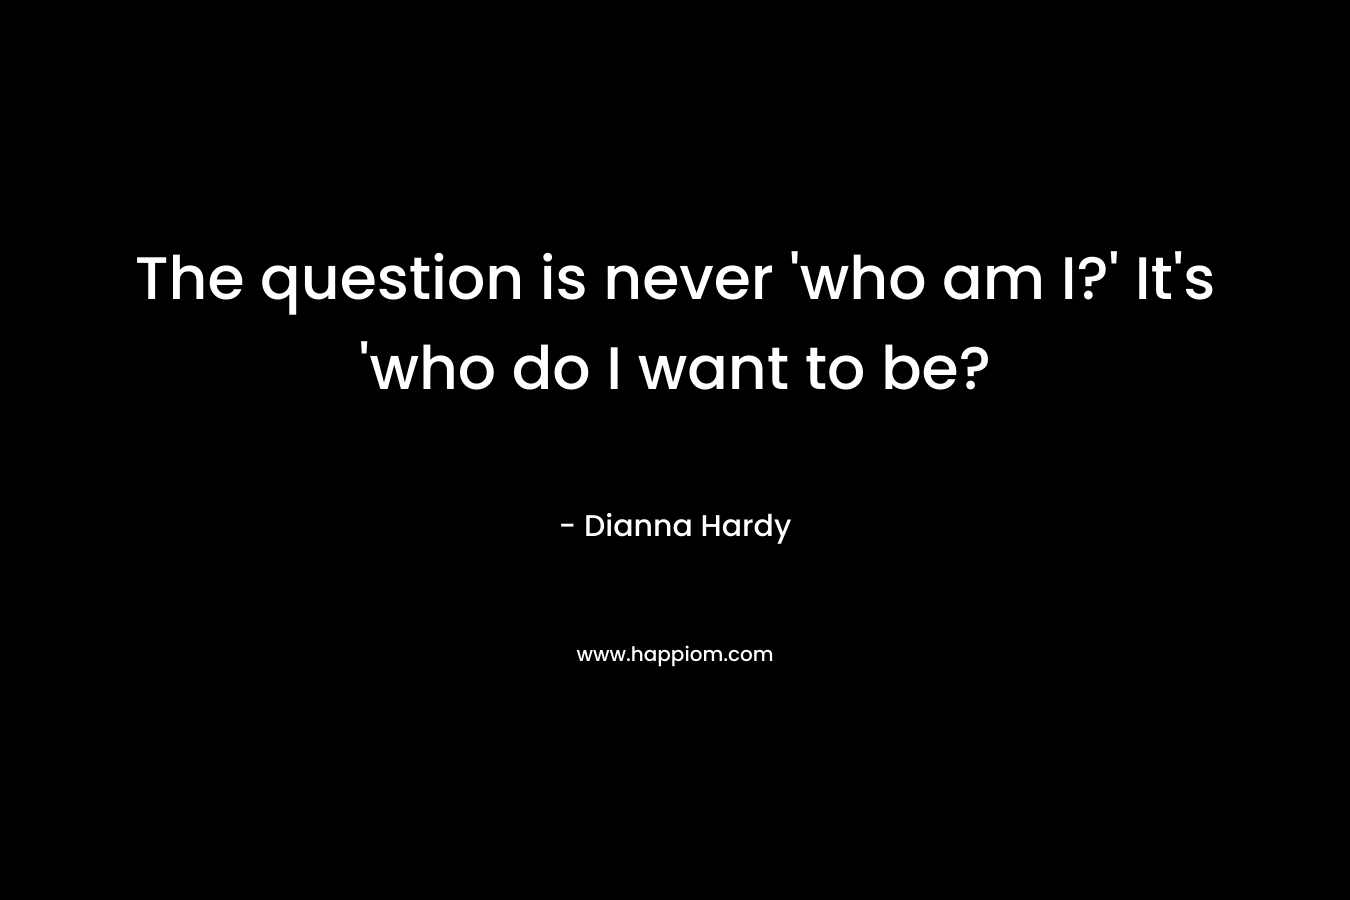 The question is never 'who am I?' It's 'who do I want to be?